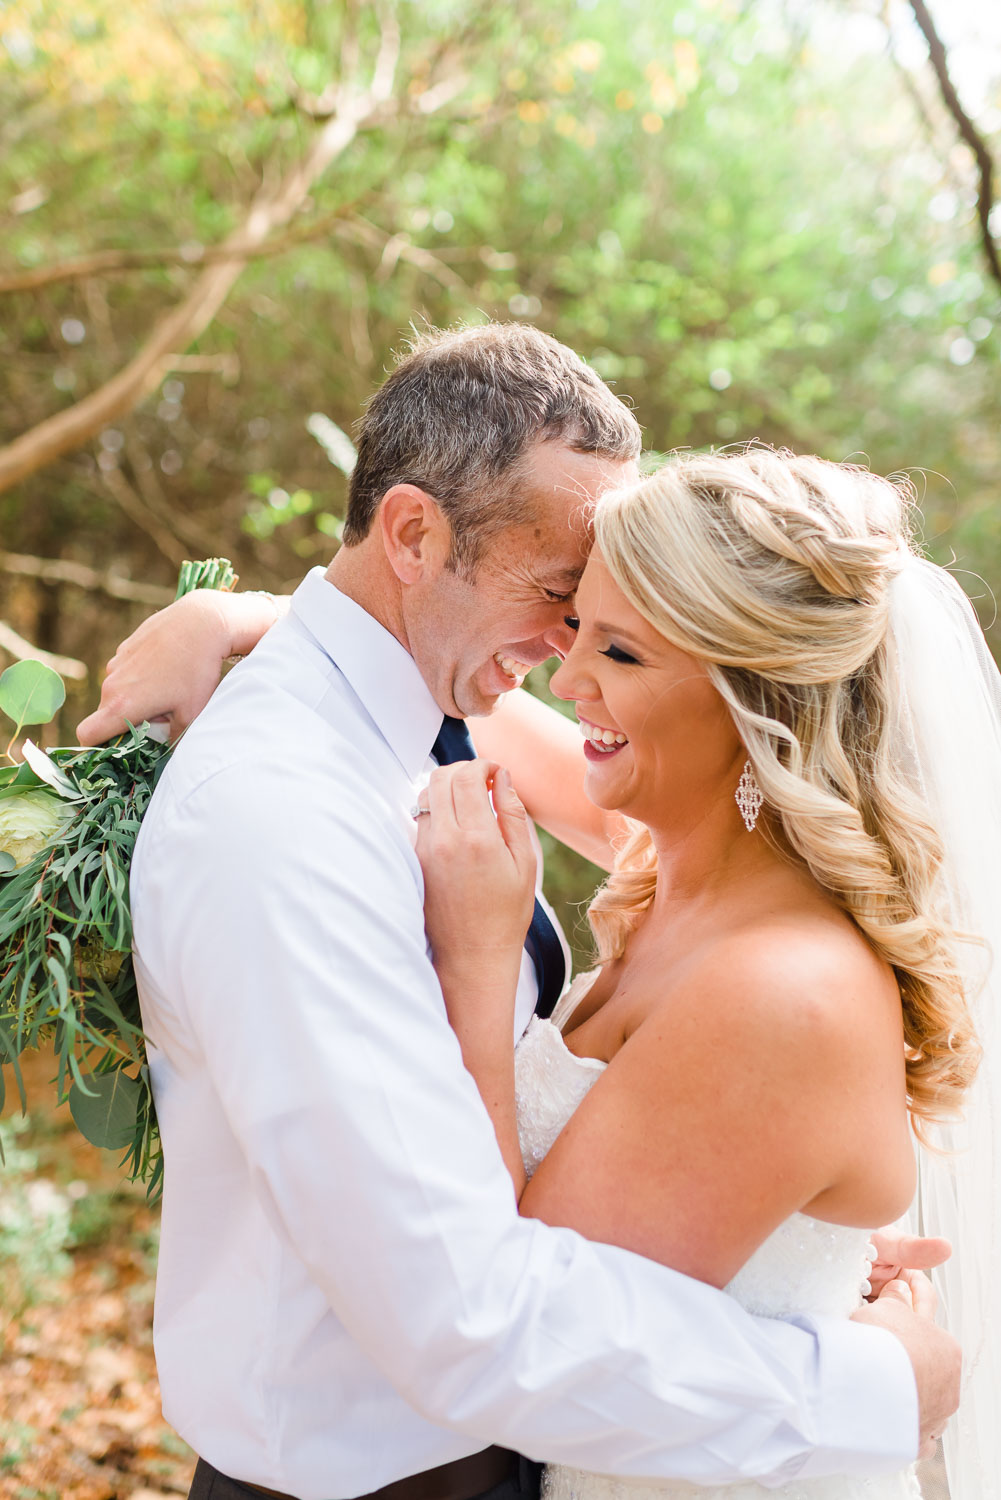 chattanooga firefighter bride and her Chattanooga policeman groom on the happiest day of their lives